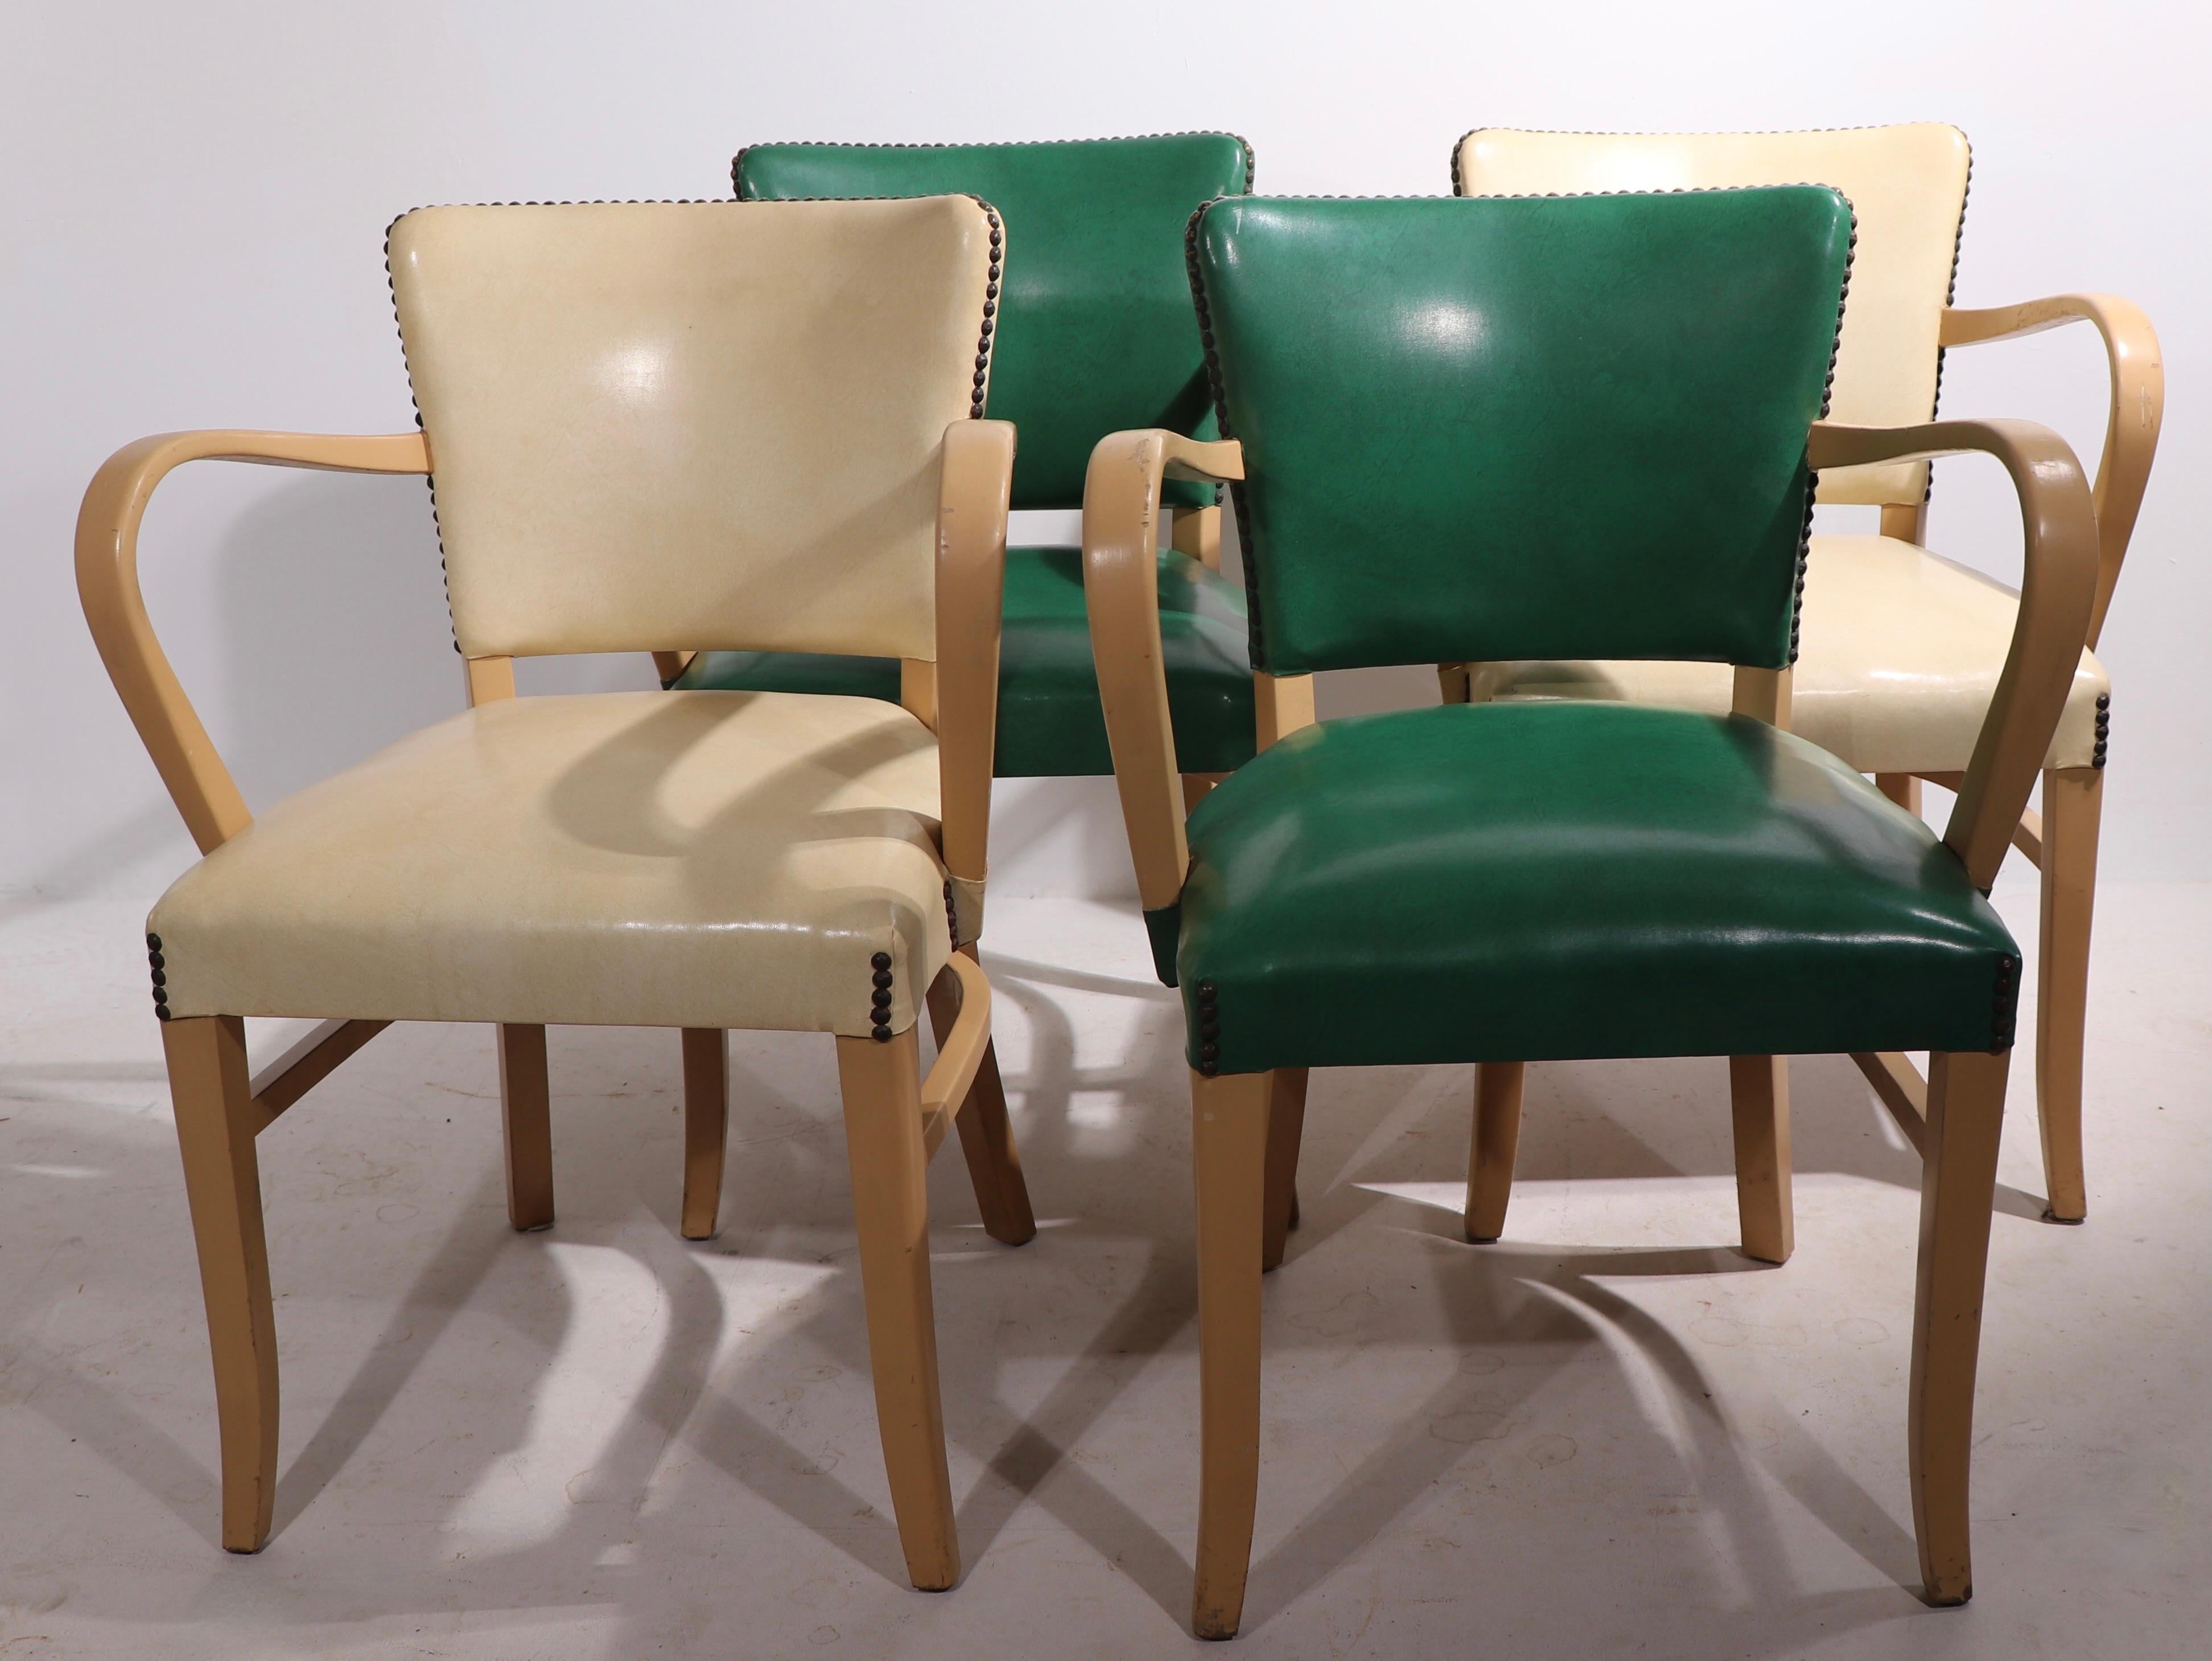 Chic stylish set of four mid century arm chairs having blonde wood frames, vinyl seats and backrests, and metal nail head stud trim. The theatrical and exaggerated arms create a dramatic profile, these chairs are pure style, a comfortable and ready